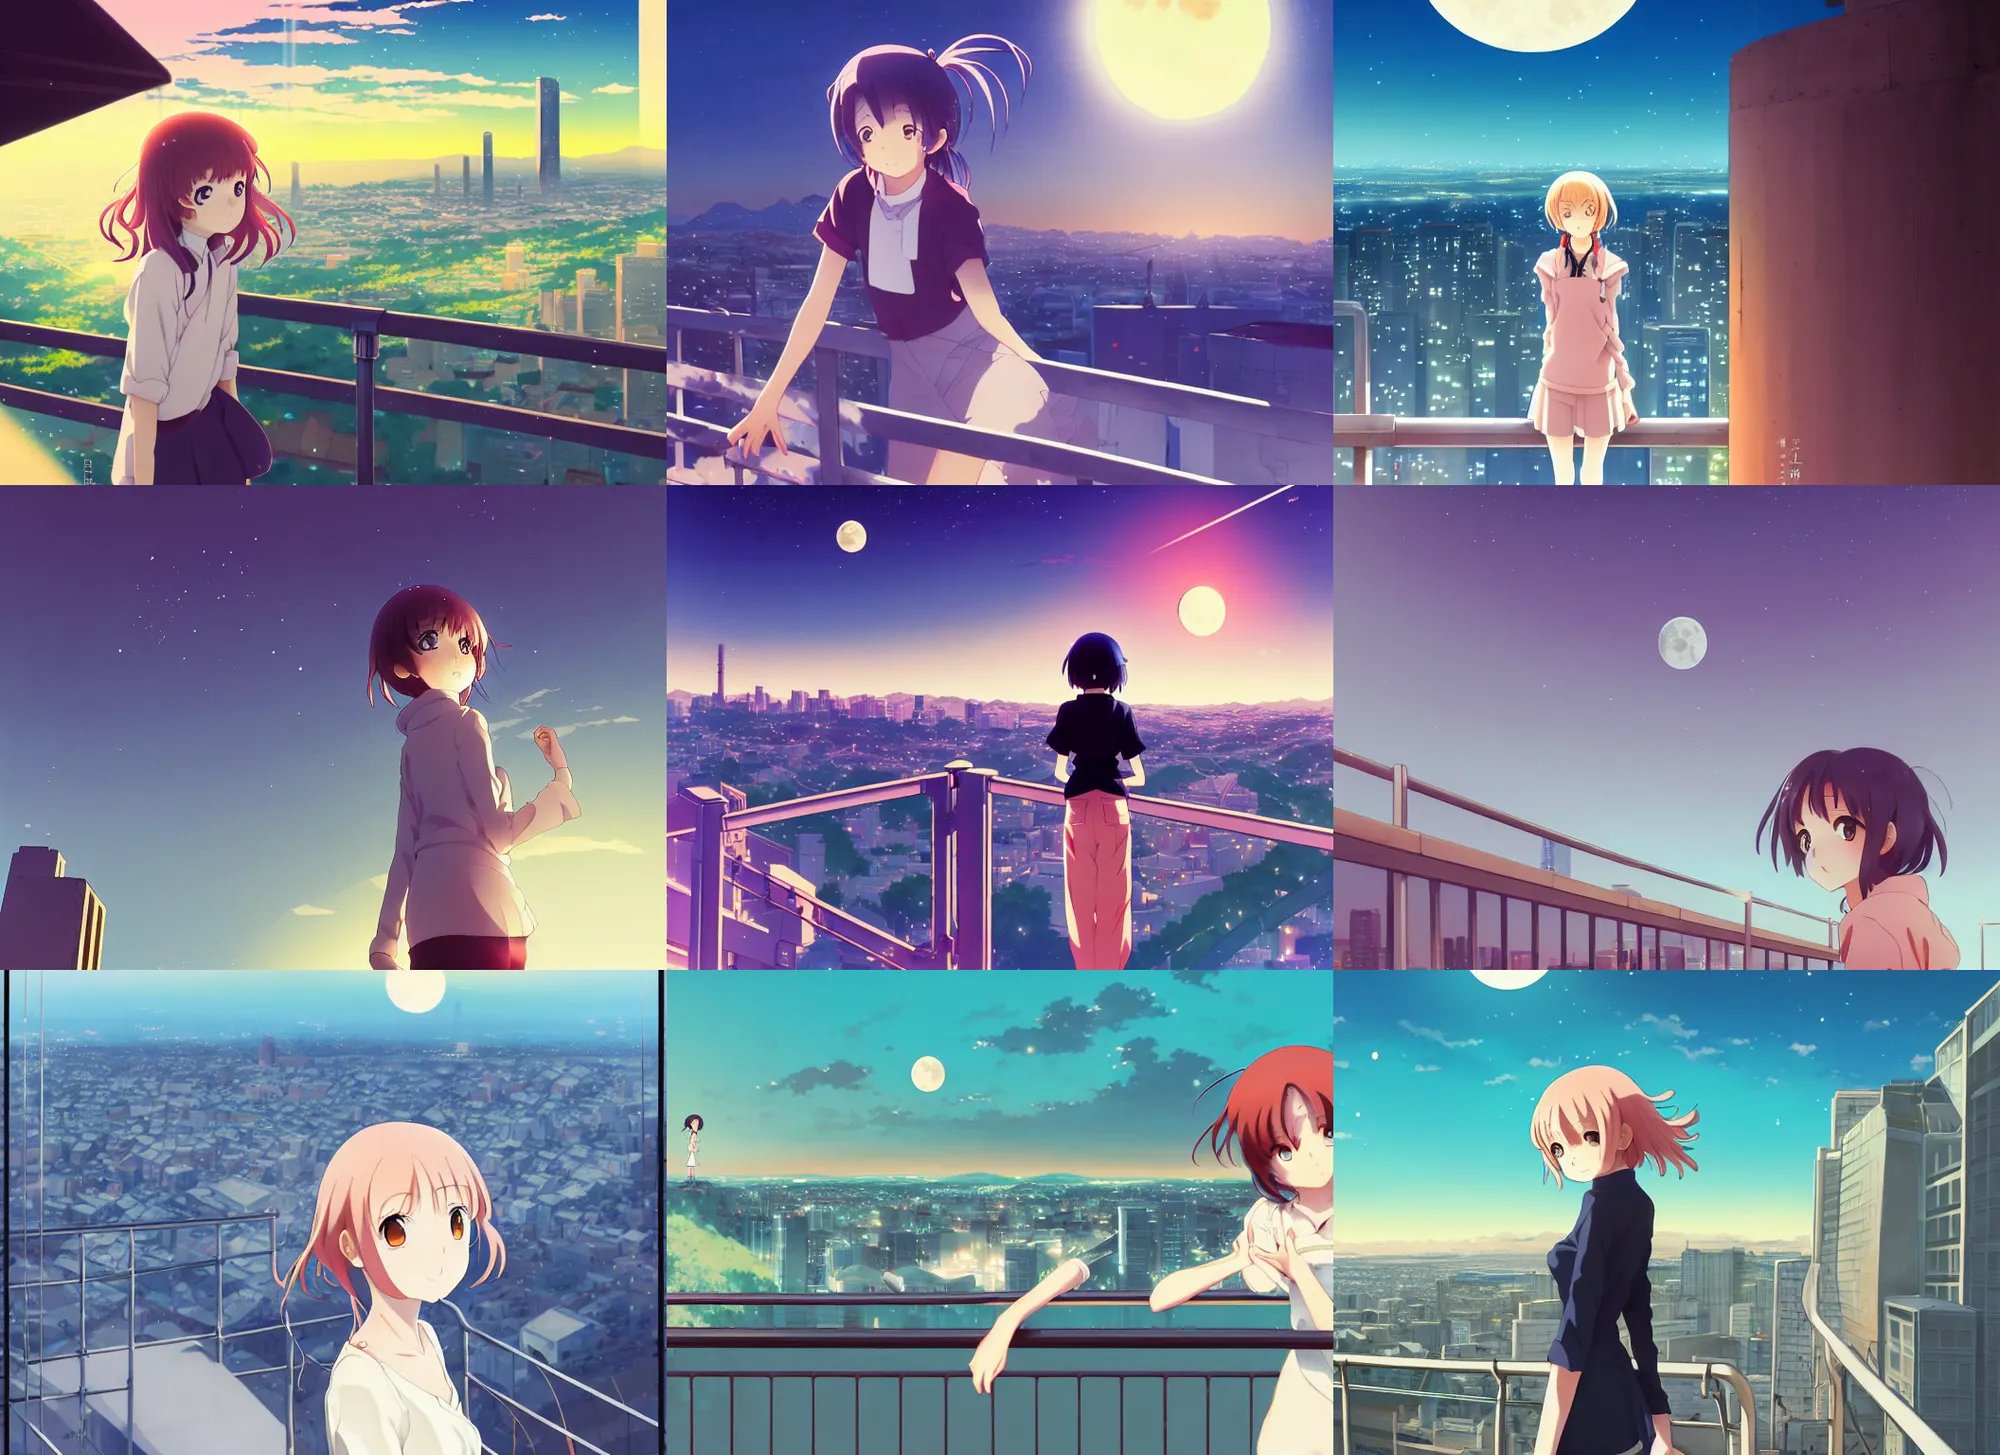 Prompt: anime visual, portrait of a young female sightseeing above the city, guardrail, moon, cute face by yoh yoshinari, katsura masakazu, evening light, dynamic pose, dynamic perspective, strong silhouette, ilya kuvshinov, anime cels, 1 8 mm lens, fstop of 8, rounded eyes, moody